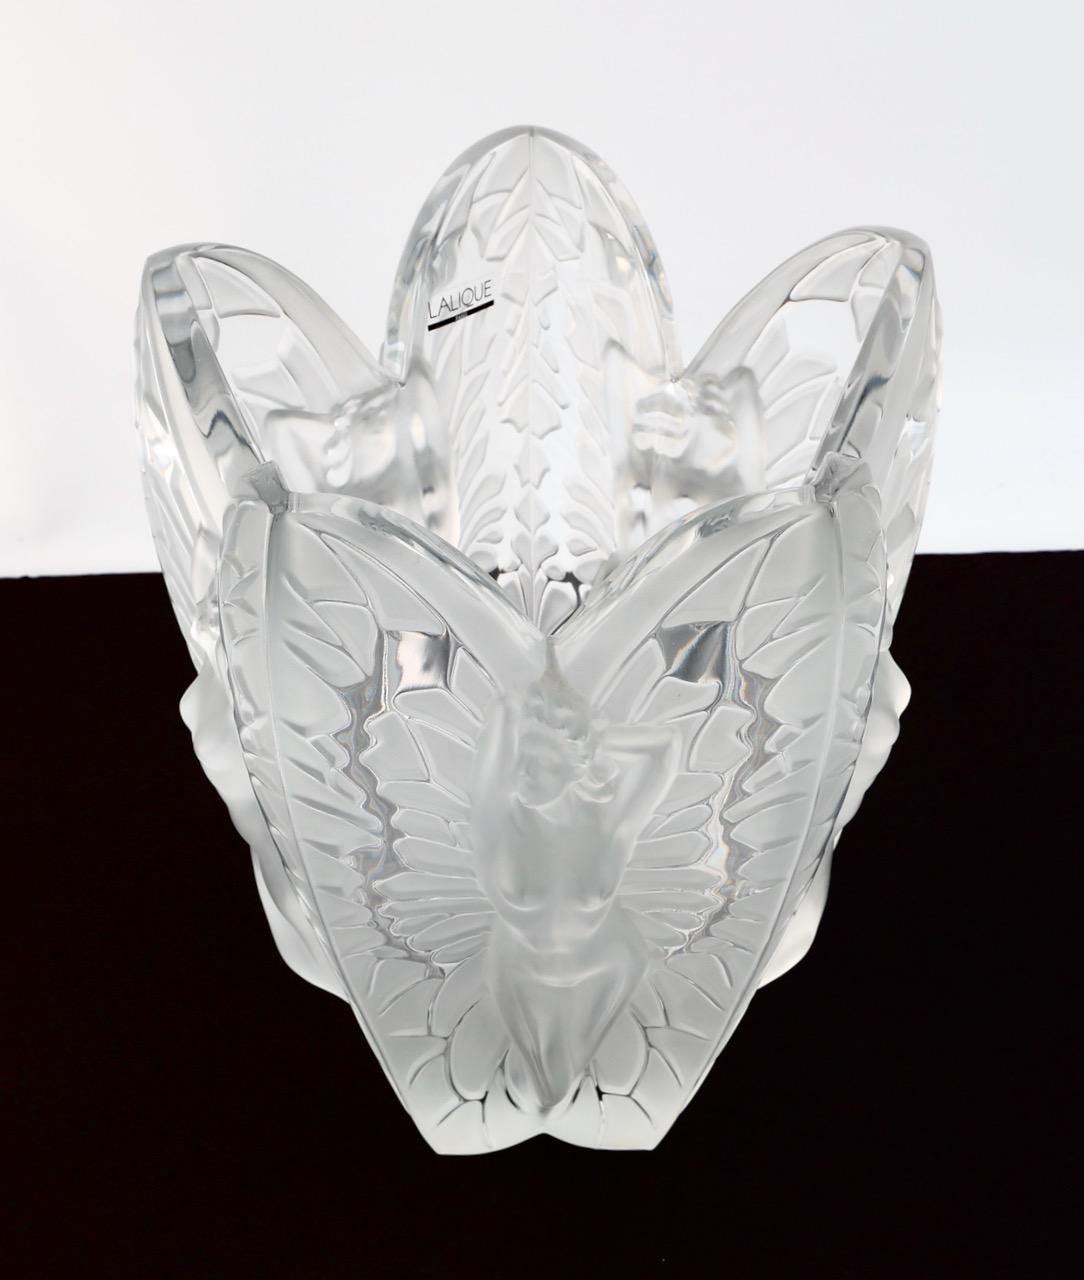 This Lalique Chrysalide Vase draws inspiration from two of Rene Lalique's favorite themes, the beauty of the female form and the natural world. Combining these two themes in the form of a mythic woman with butterfly wings, the Chrysalide vase is